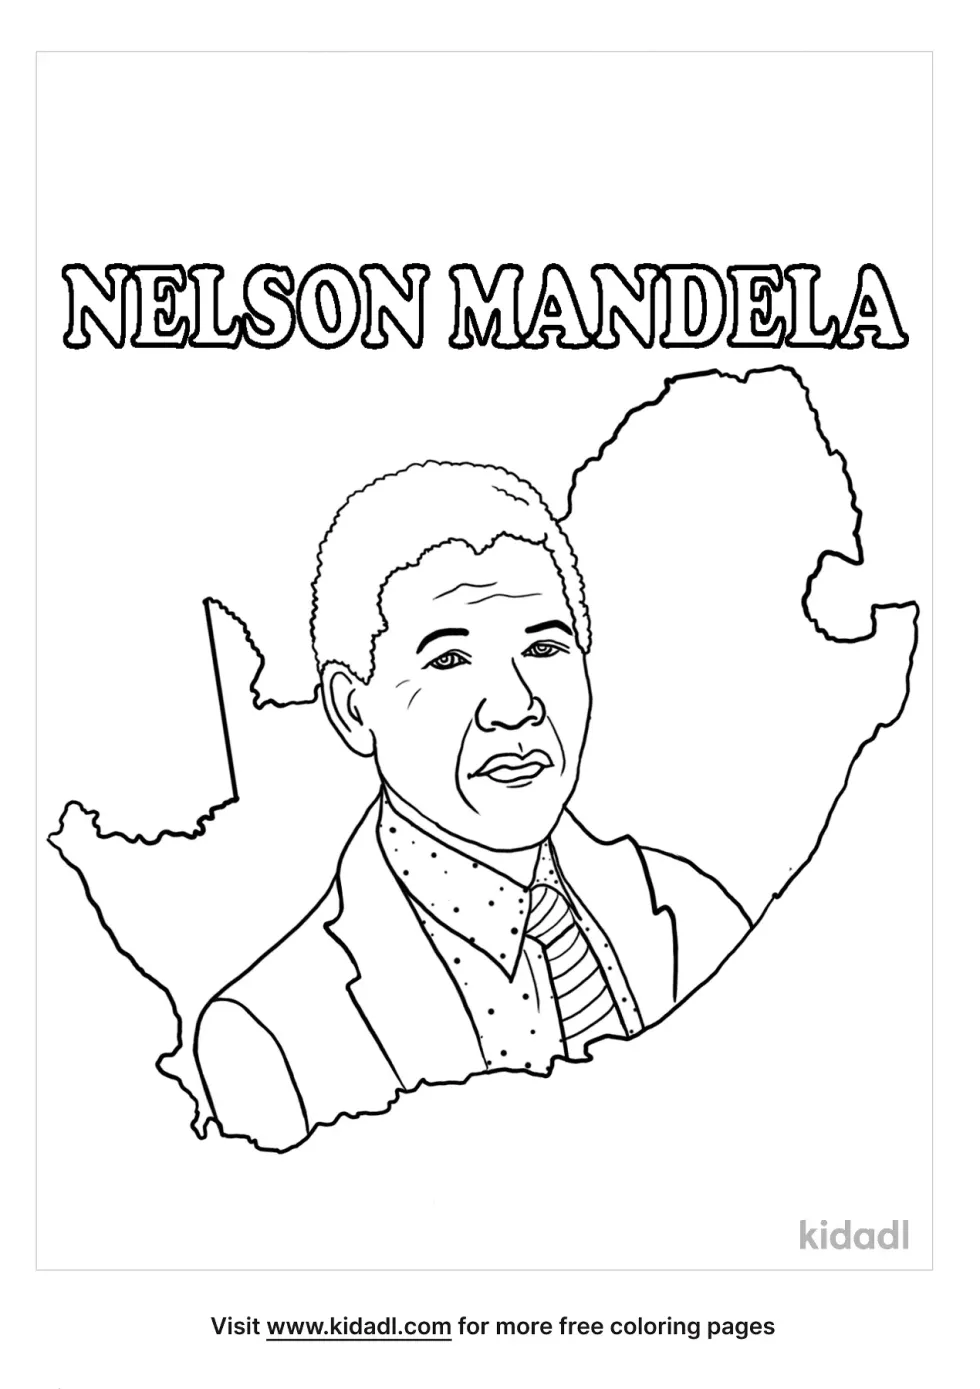 Nelson Mandela Coloring Page